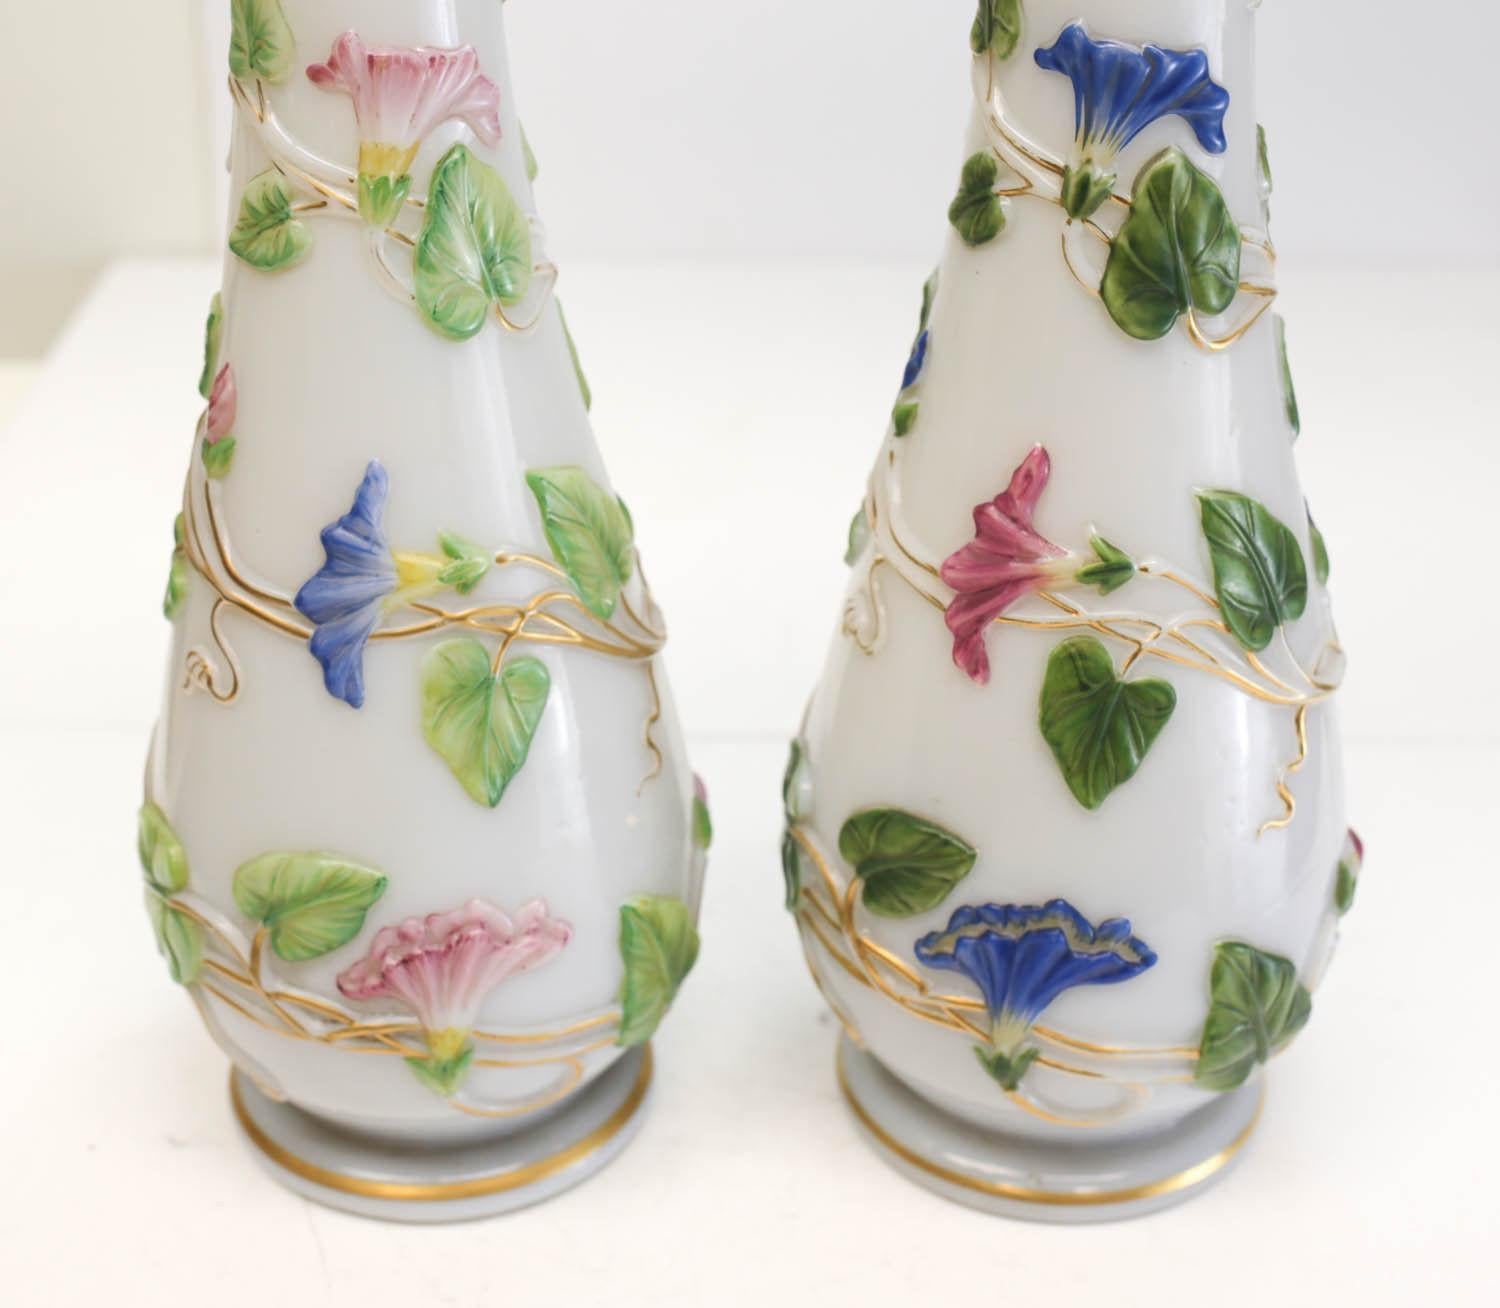 A pair of charming Baccarat French Opaline enamel hand painted glass vases, circa 1900. Beautiful blue and pink hand painted enamel florals to the white Opaline glass vases. Unmarked, but determined to be Baccarat. Weight approx., 20